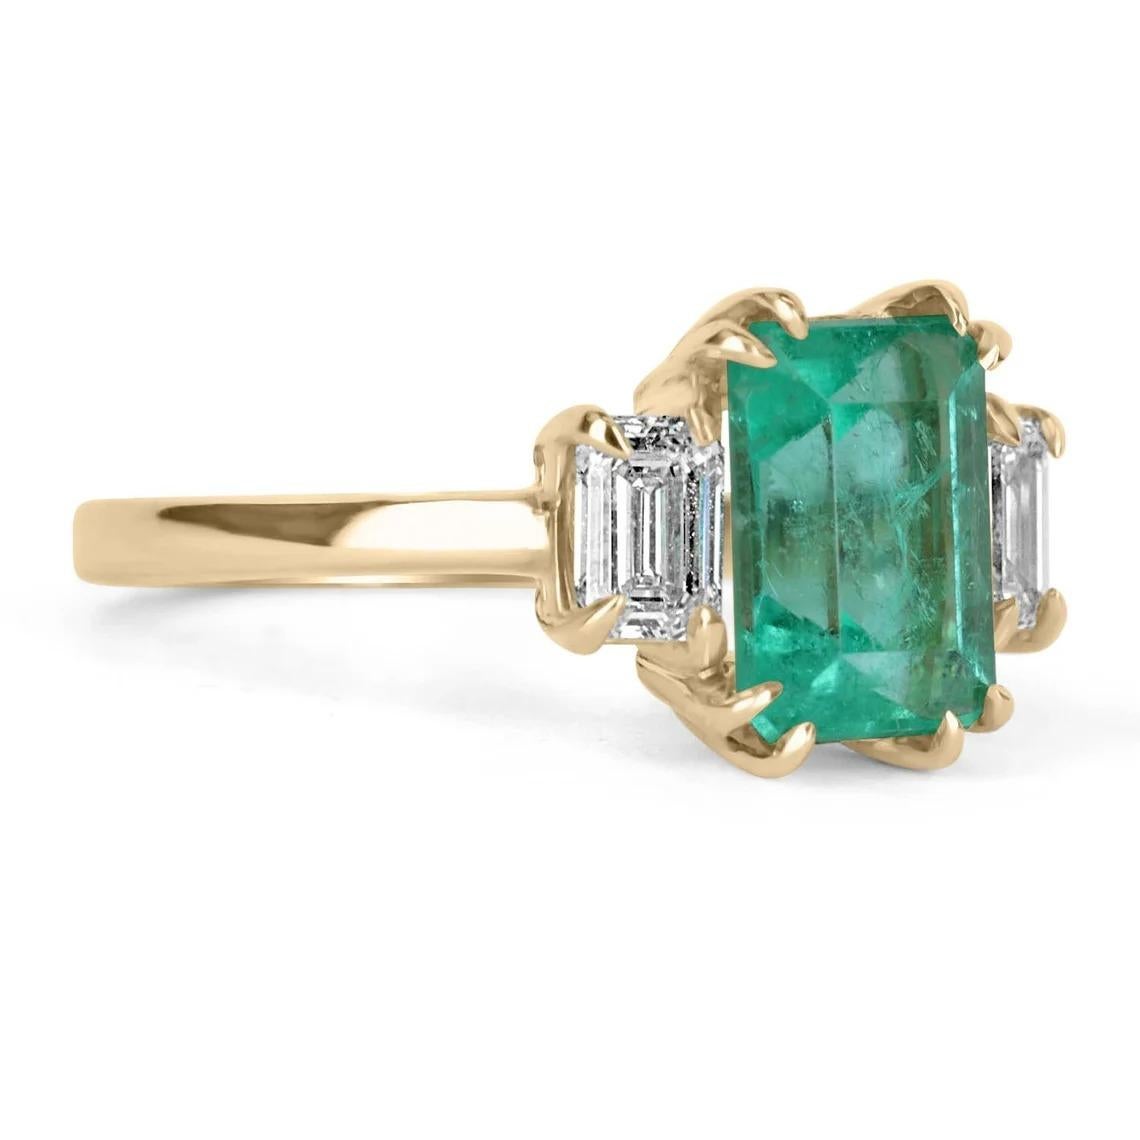 Shower her with love with this Colombian emerald and diamond three-stone ring. An extraordinary custom-created ring. Designed and created by our own master jeweler, 